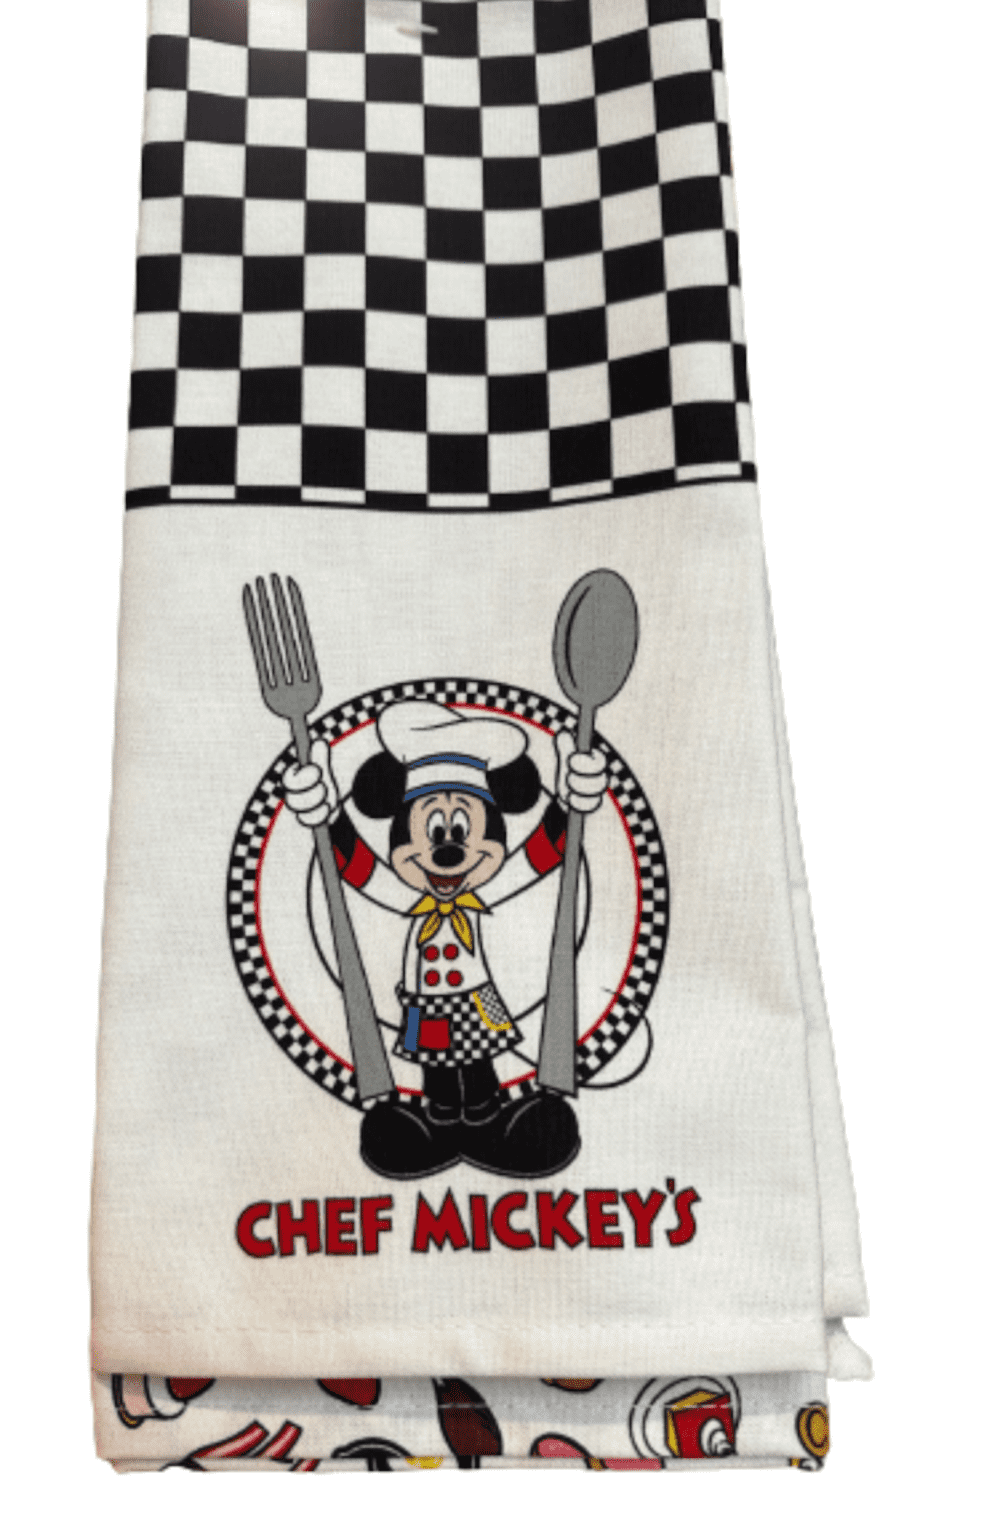  Disney Parks Mickey Mouse and Friends Colorful Kitchen Towel  Set of 2 NEW